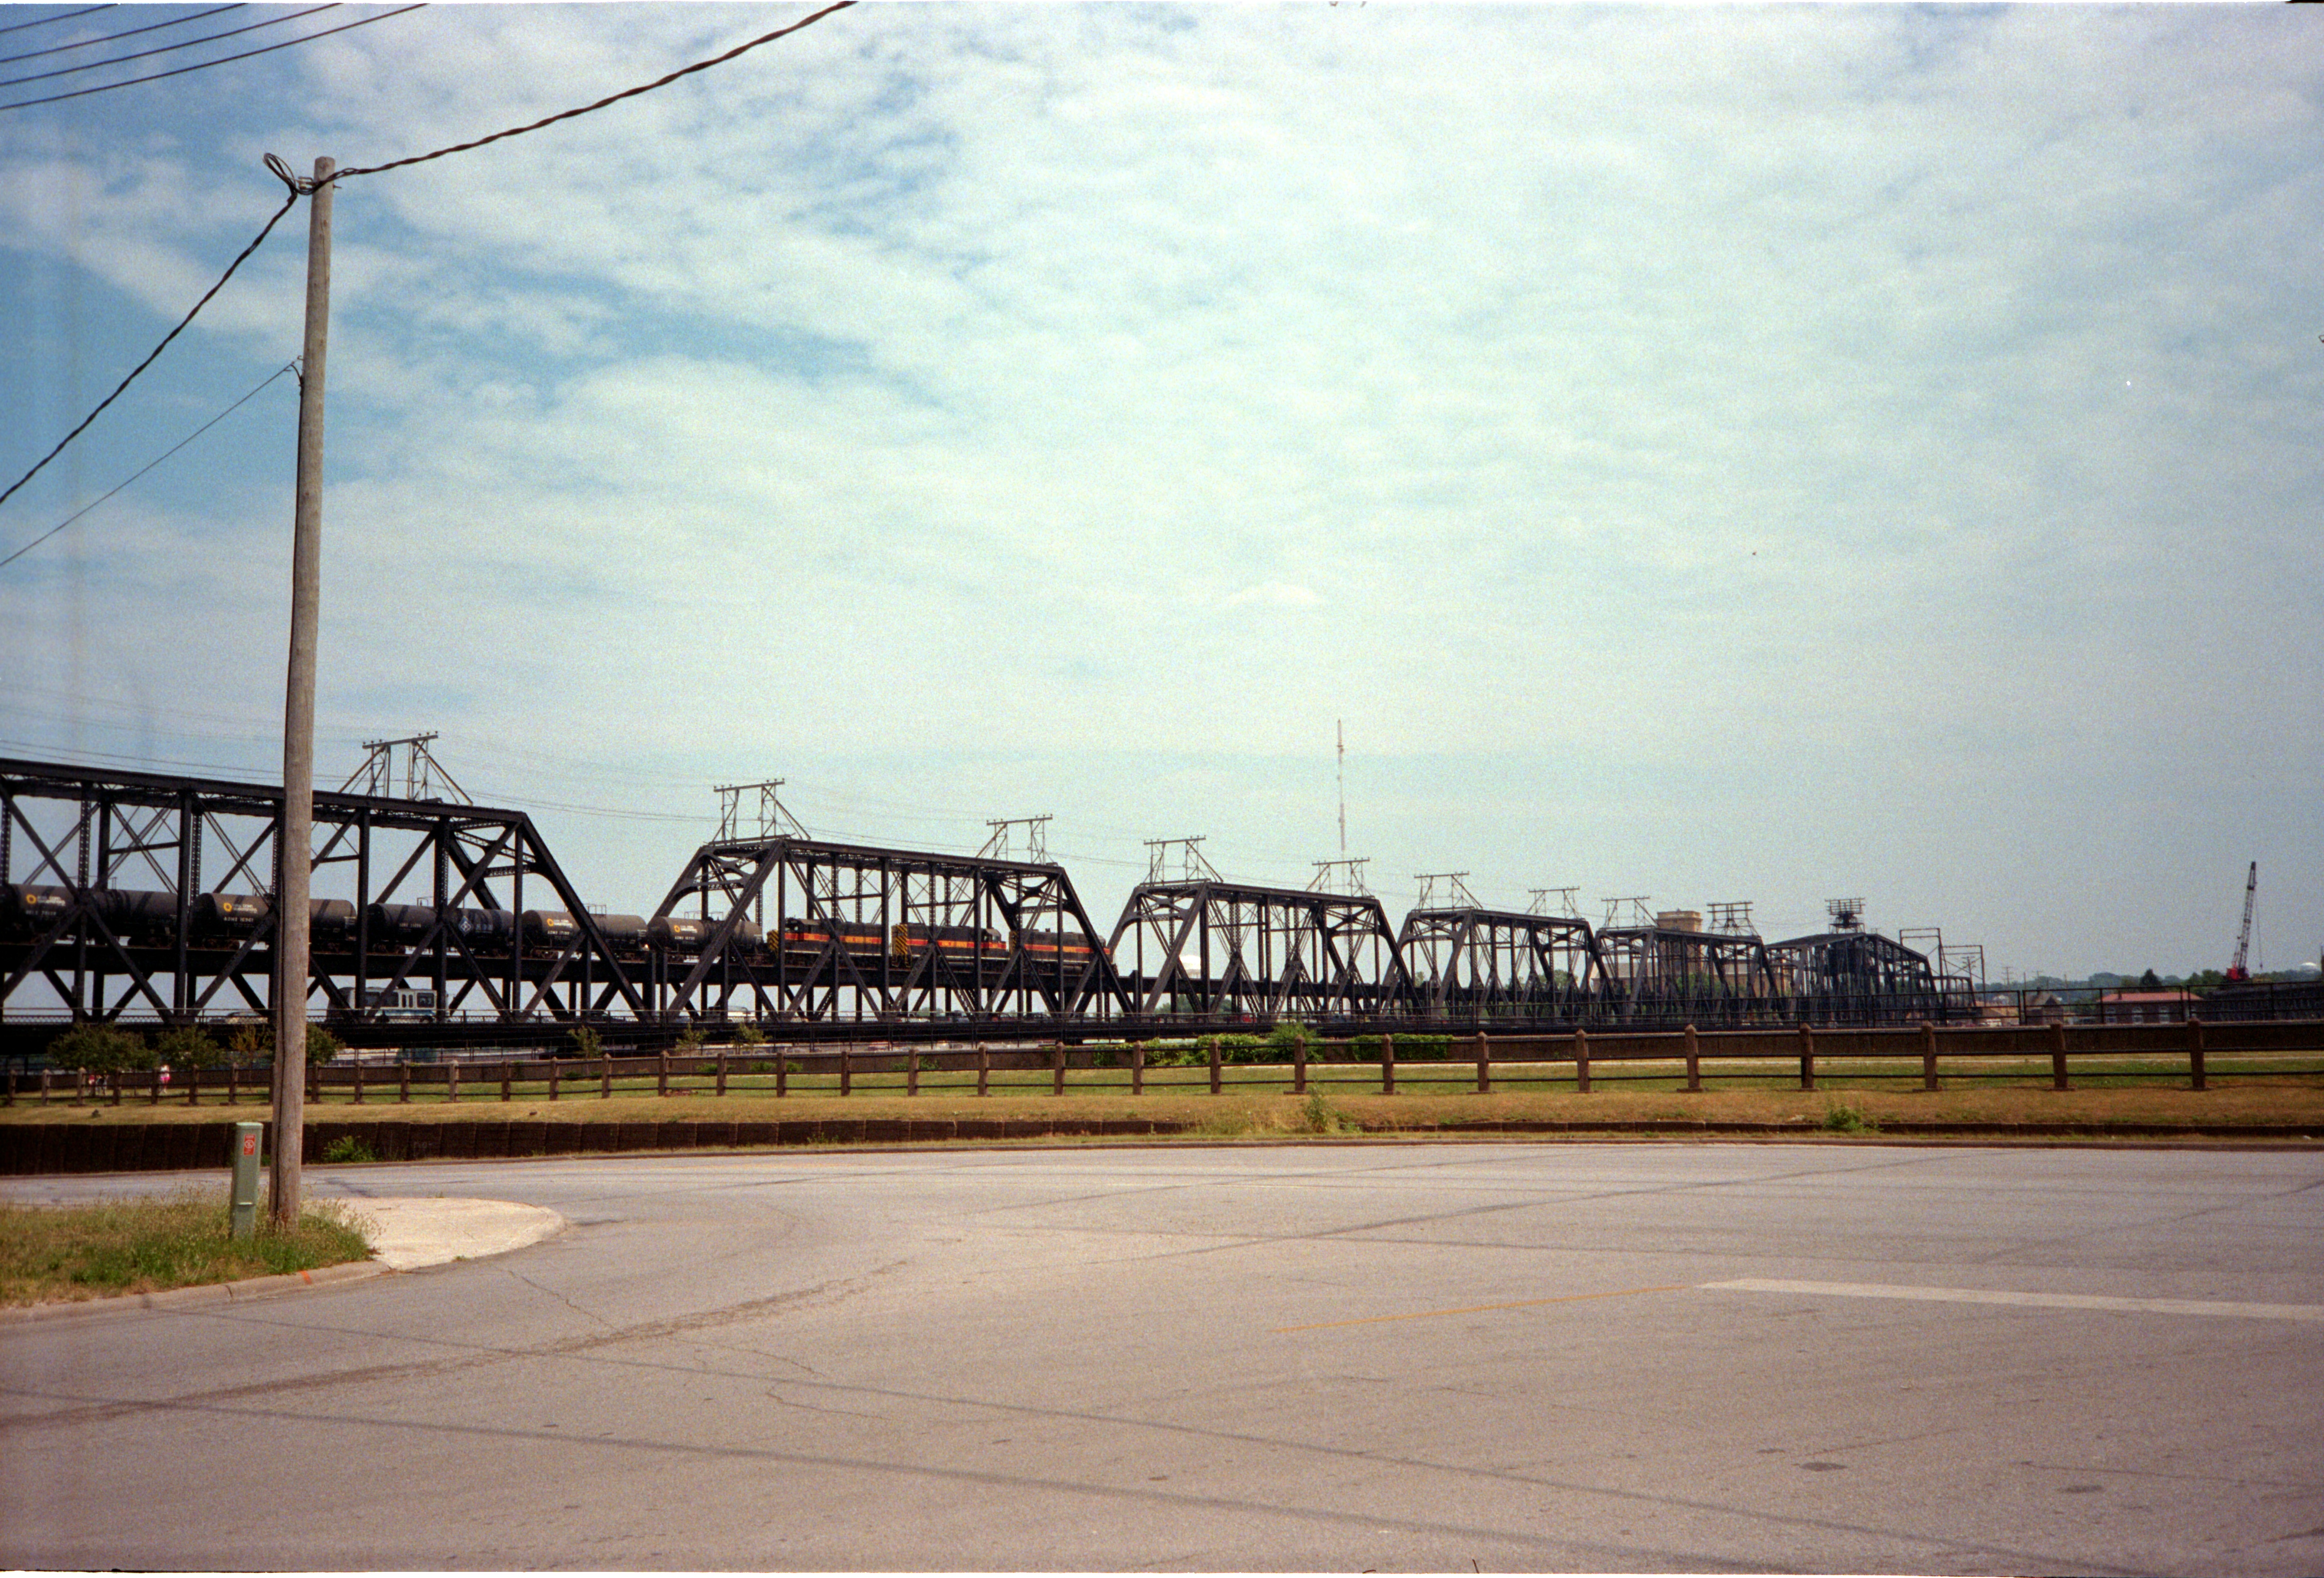 604, 625, and 405 haul a rather rare mid-day eastbound over the Government Bridge in Davenport, IA, back in the summer of 1996